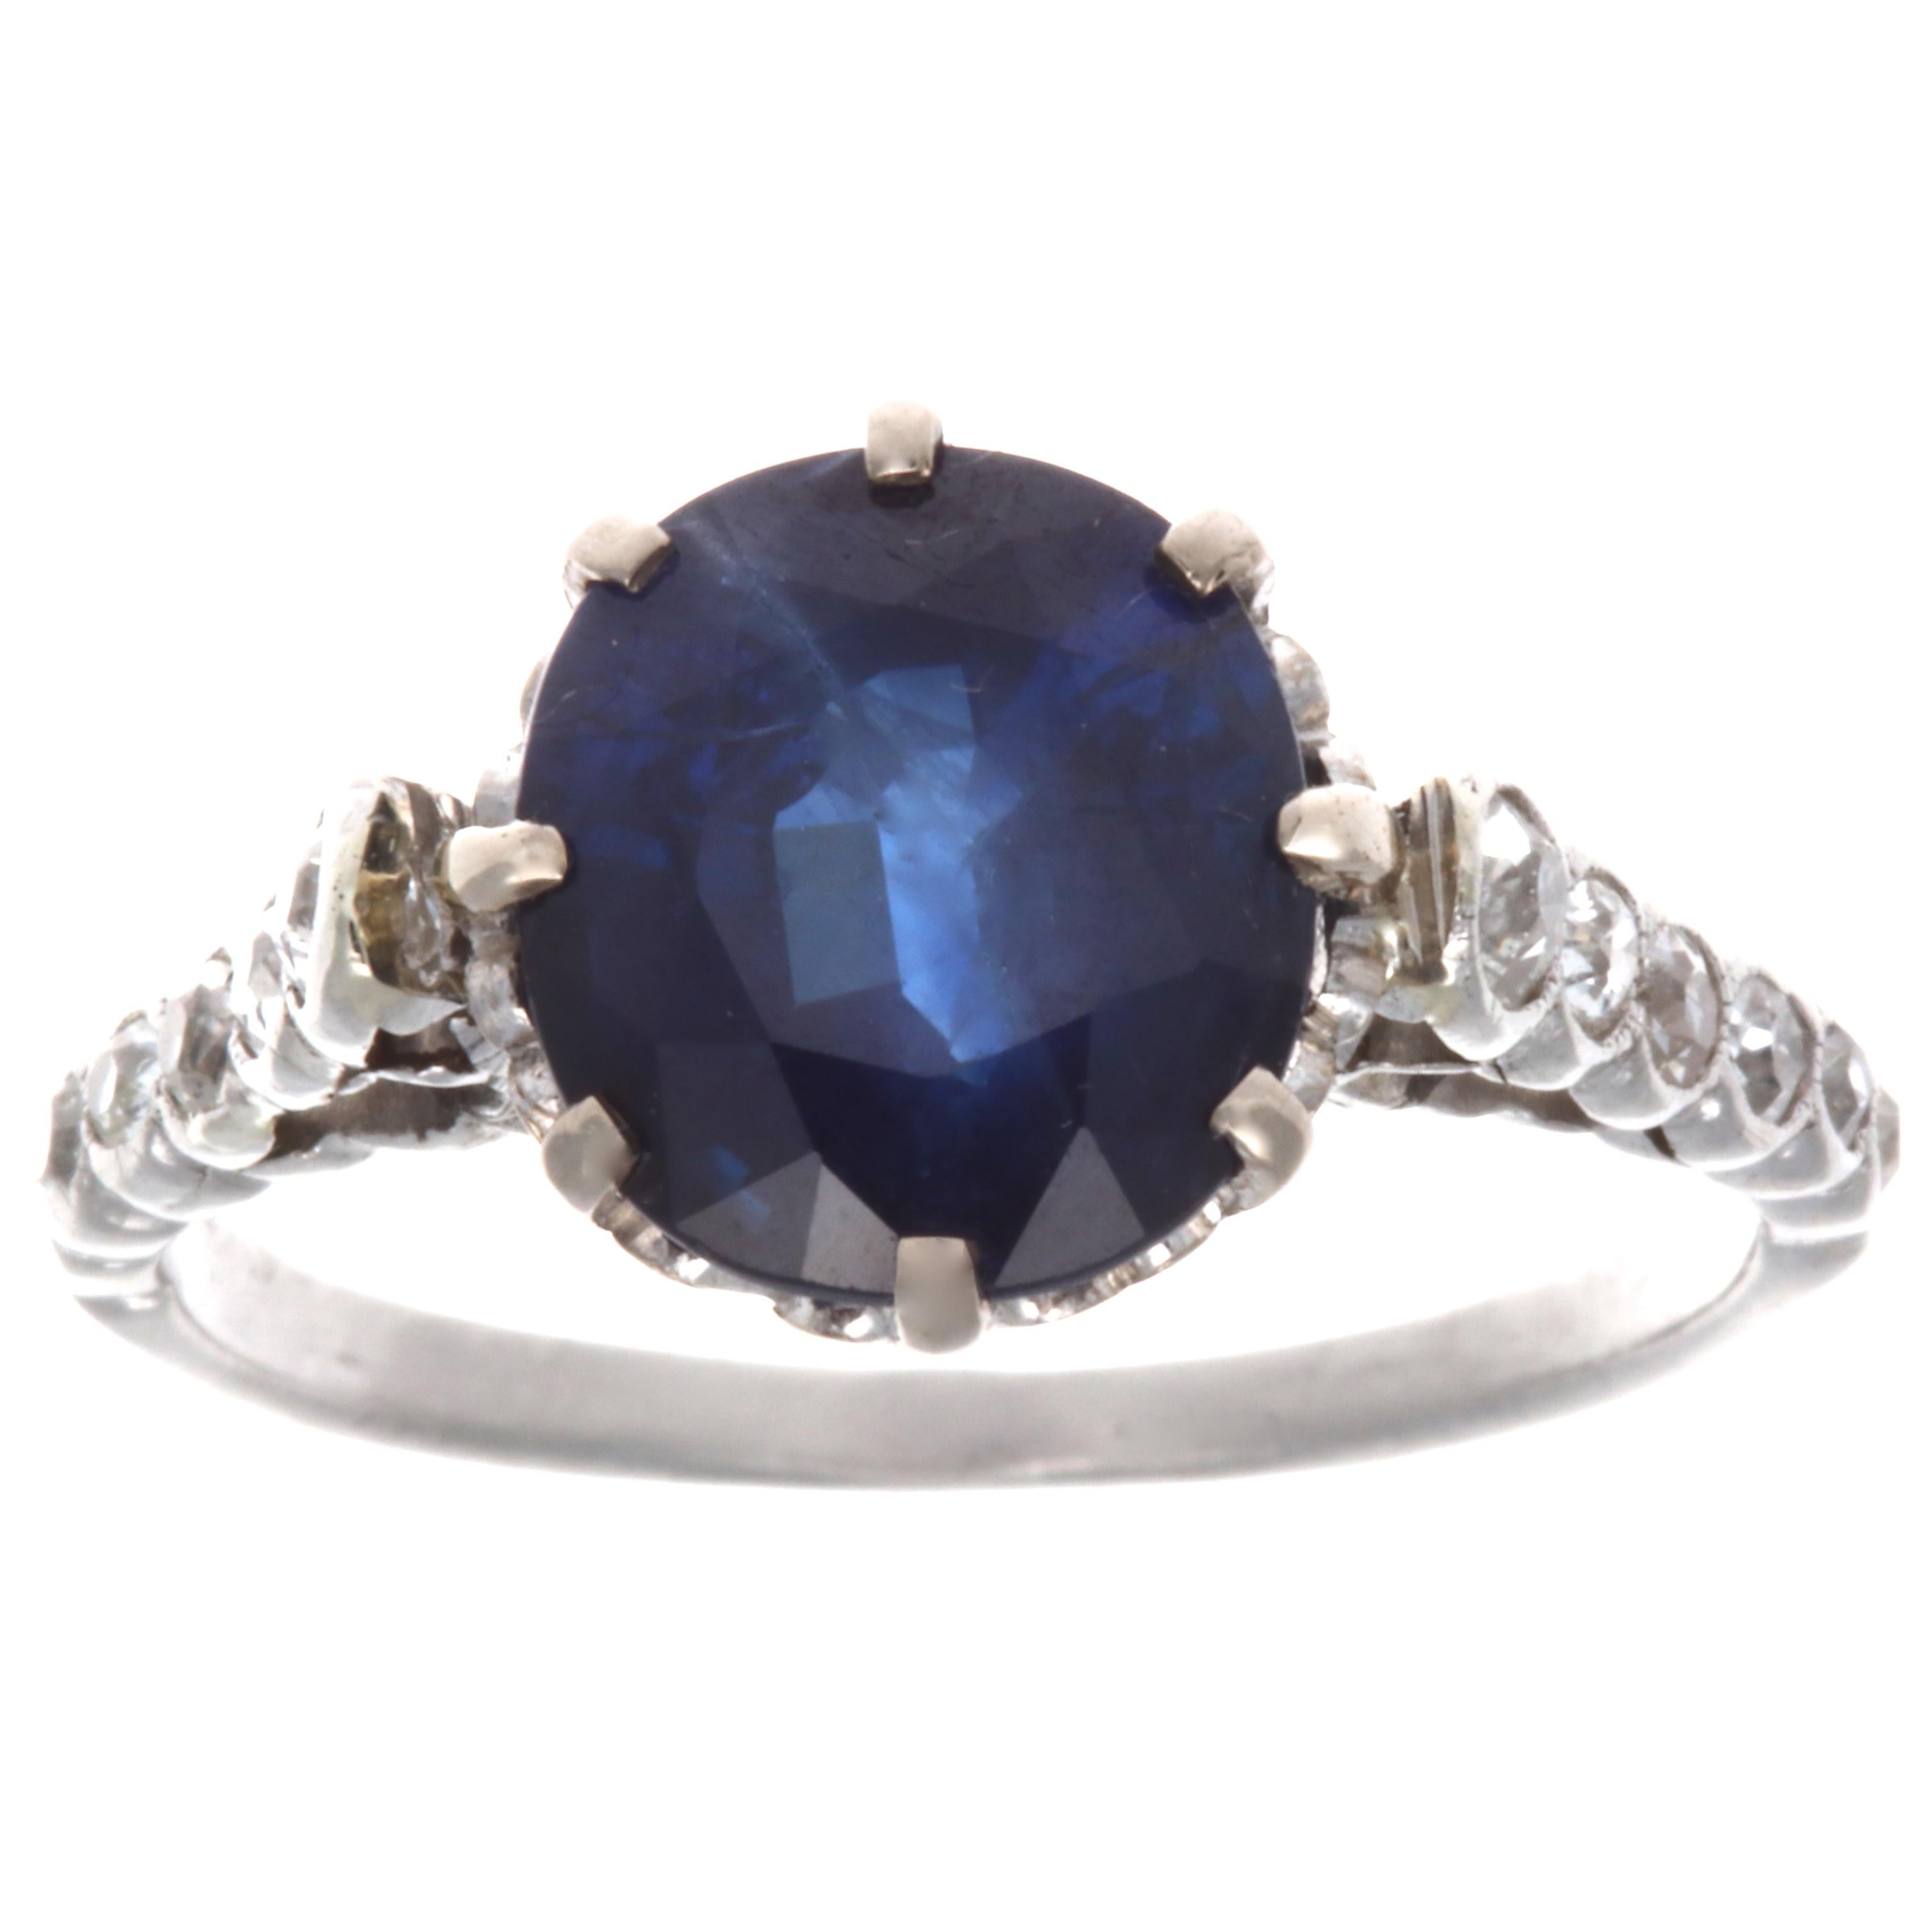 From the Edwardian era this fine 3.58 carat sapphire exhibits a rich pure blue translucent color. Accented by round cut diamonds on the platinum ring. Ring size 5 1/2 and may be re-sized to fit. 
Flawless Protection Plan: 
7 day return policy for